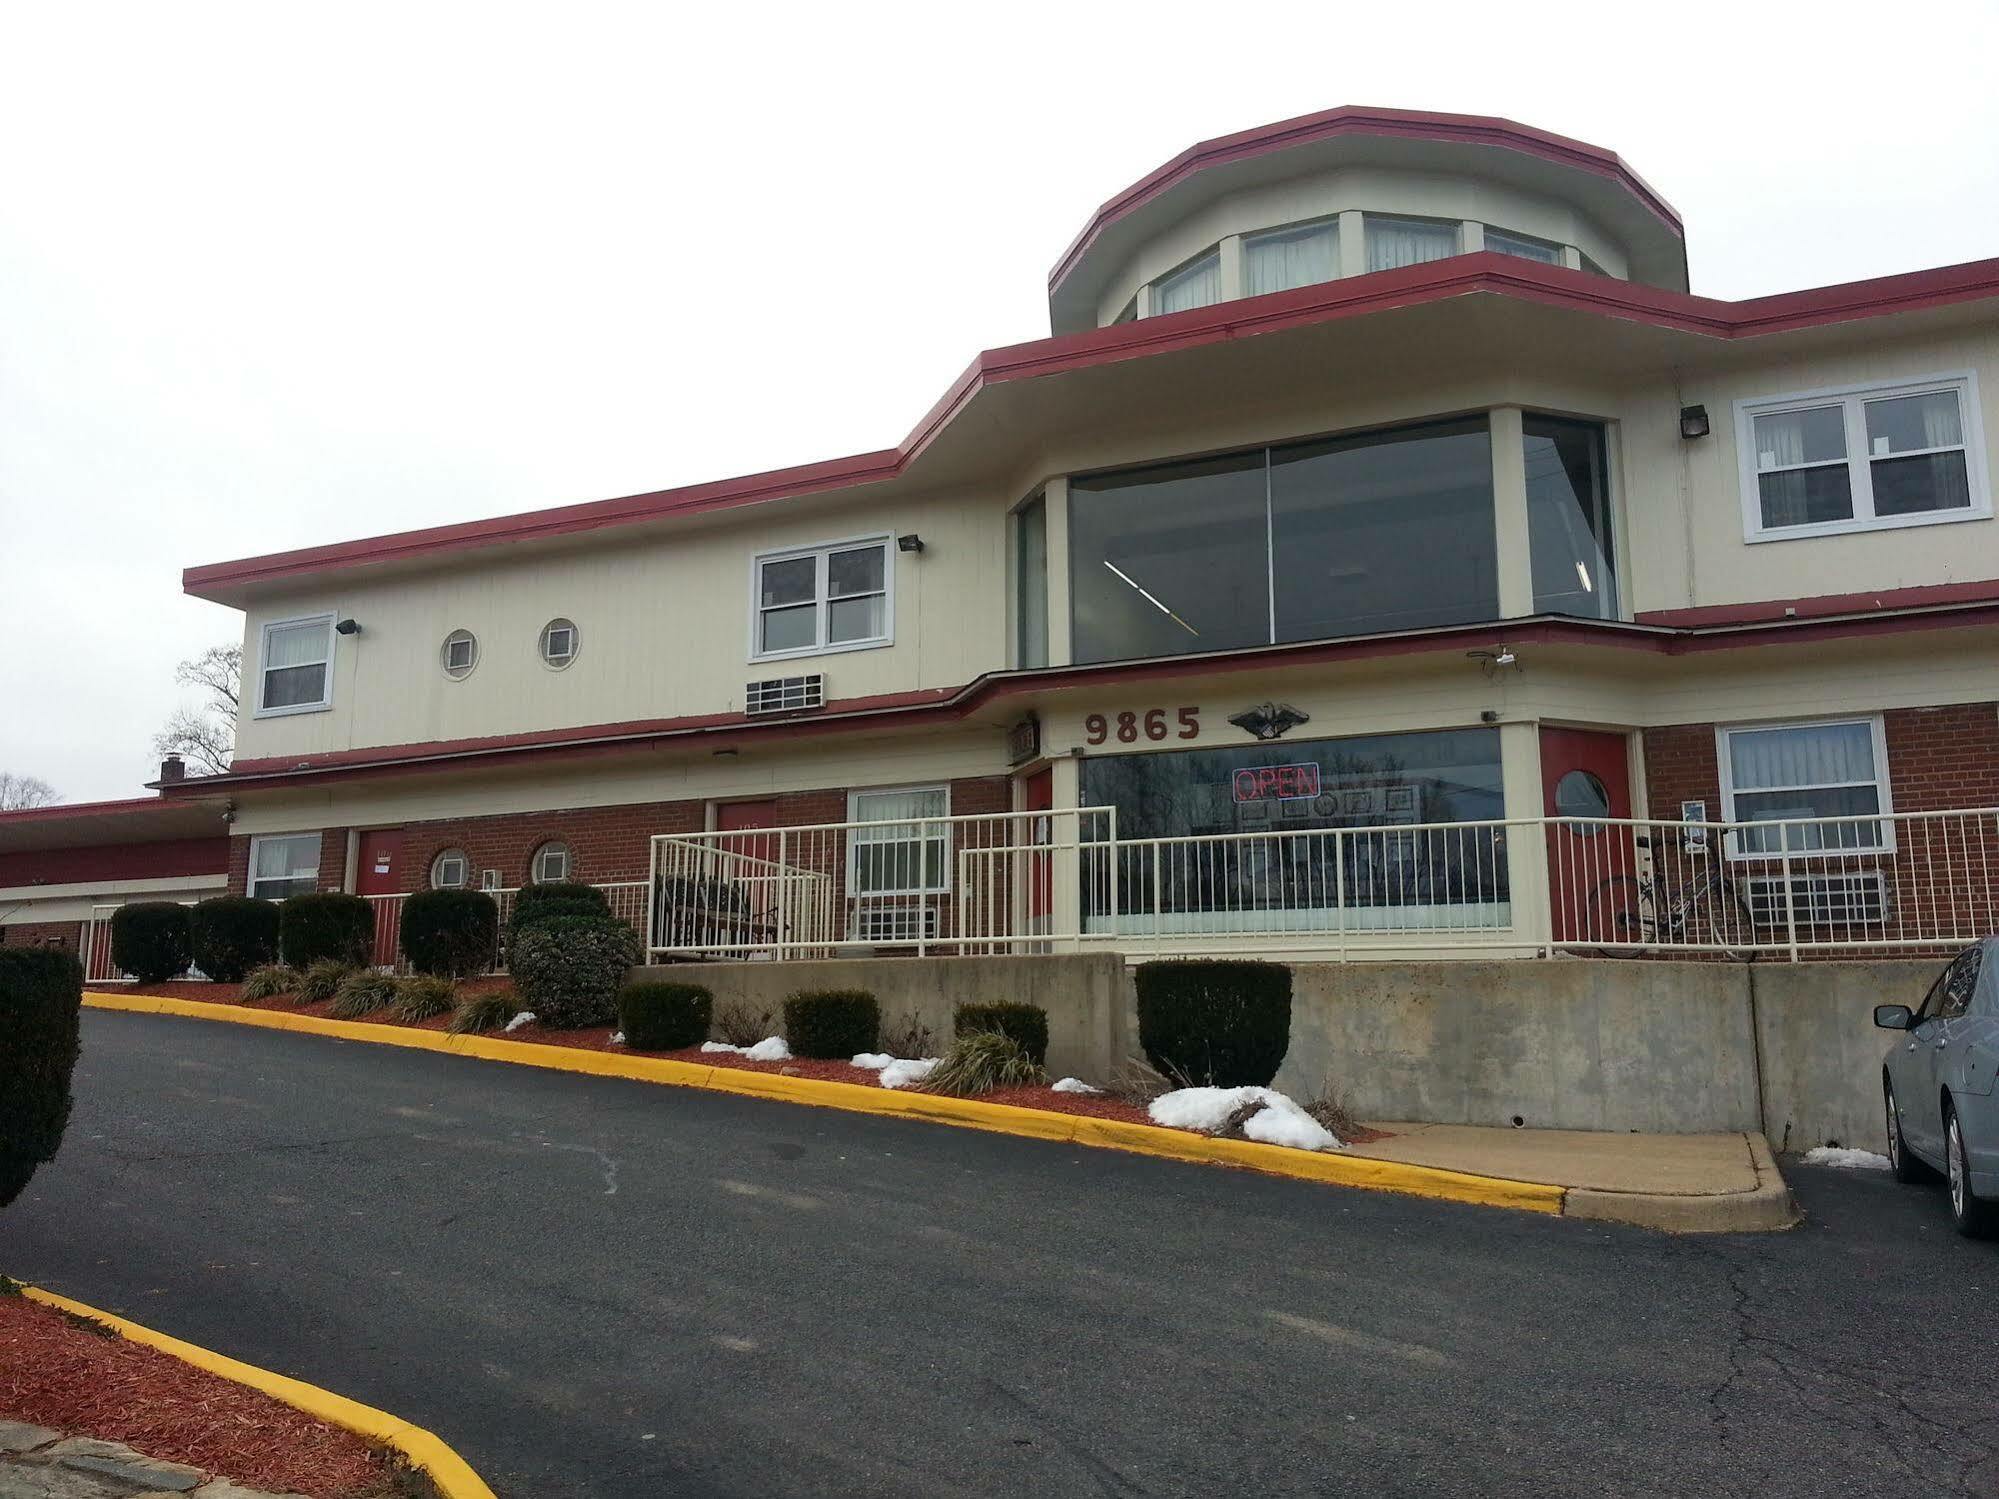 HOTEL LEE HIGH INN FAIRFAX, VA 2* (United States) - from US$ 72 | BOOKED